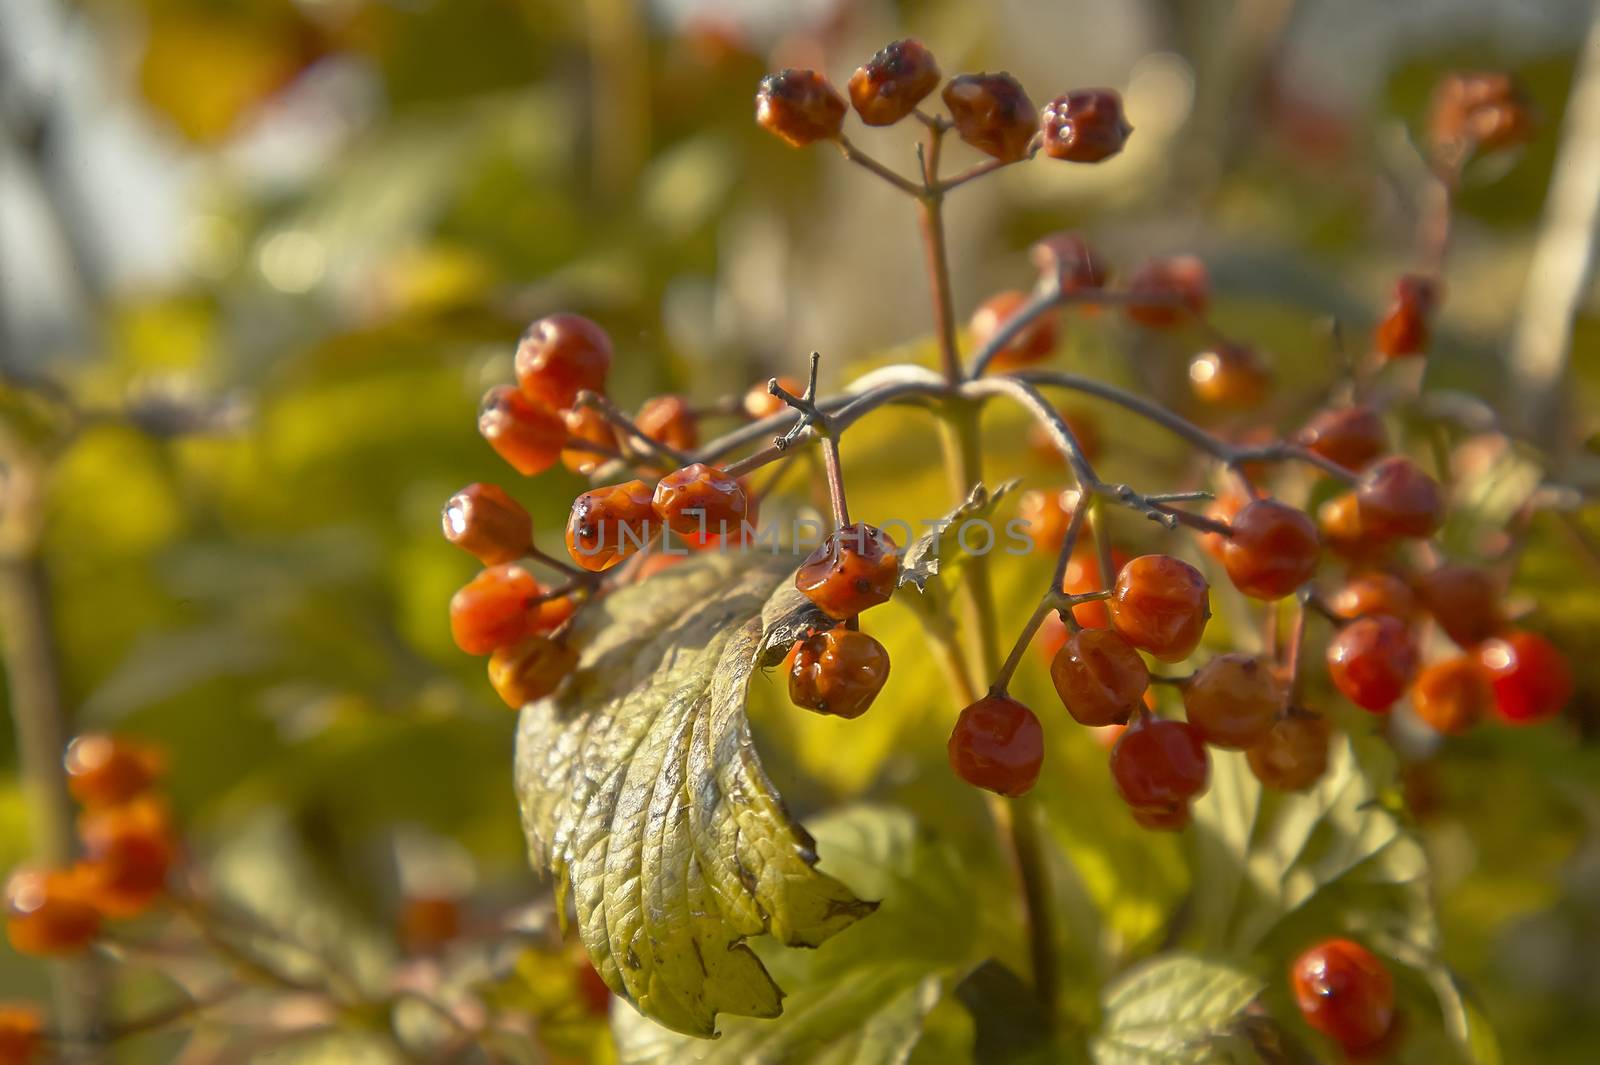 The plant of small red berries by pippocarlot